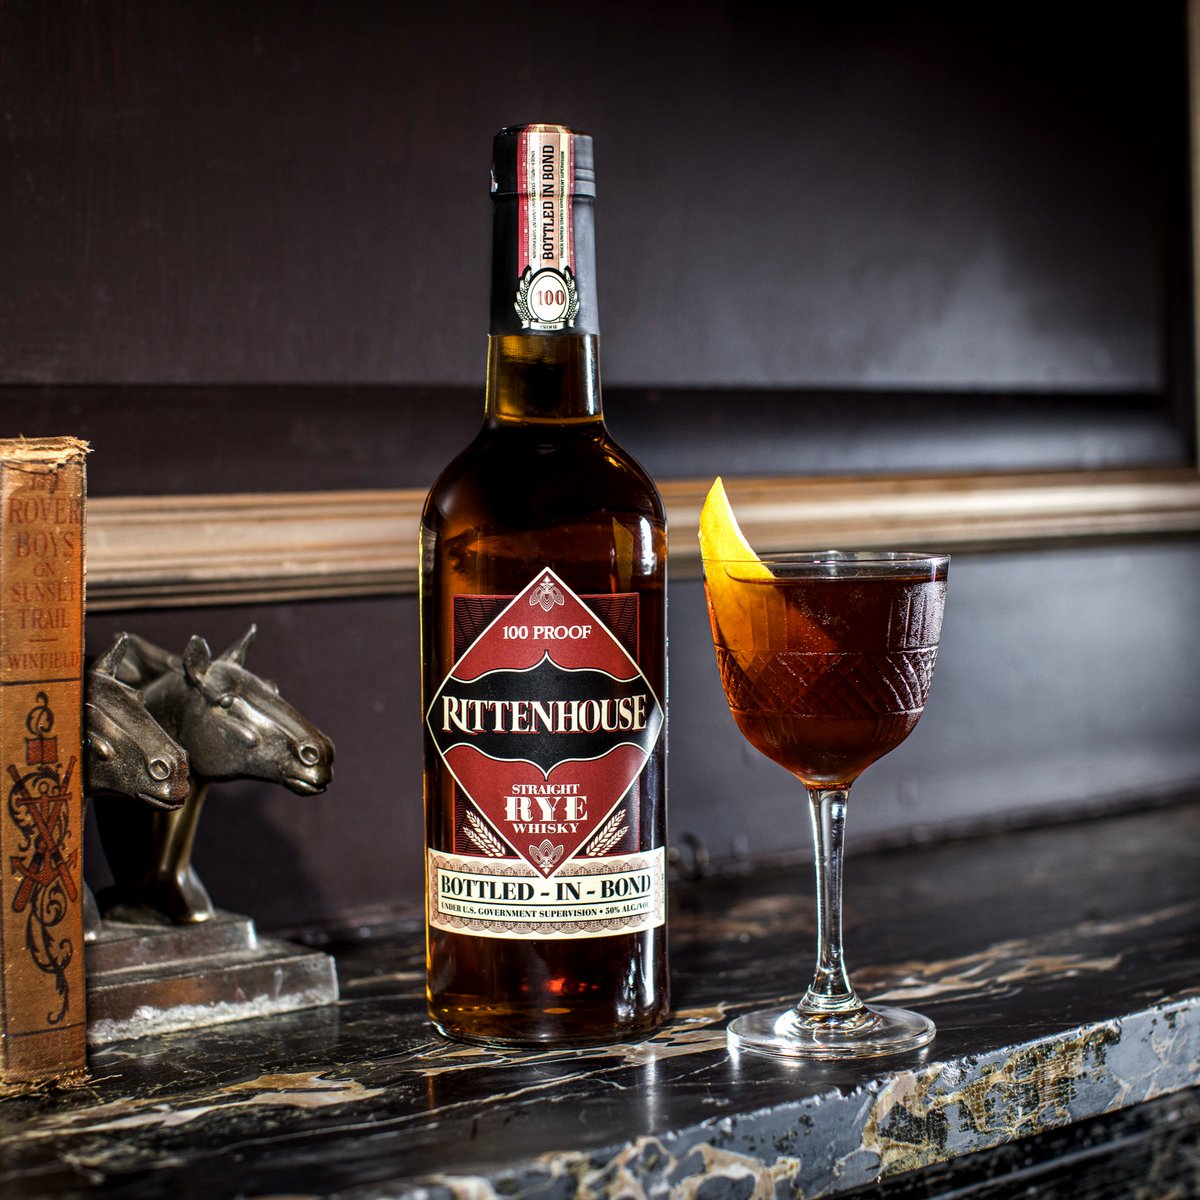 Rittenhouse Rye Bottled-in-Bond is full of rich flavor and history. It stands strong at 100 proof, featuring a spicy flavor profile and now even has its own Instagram account! Follow @rittenhouserye to get expert cocktail recipes, learn about the brand’s history and more.